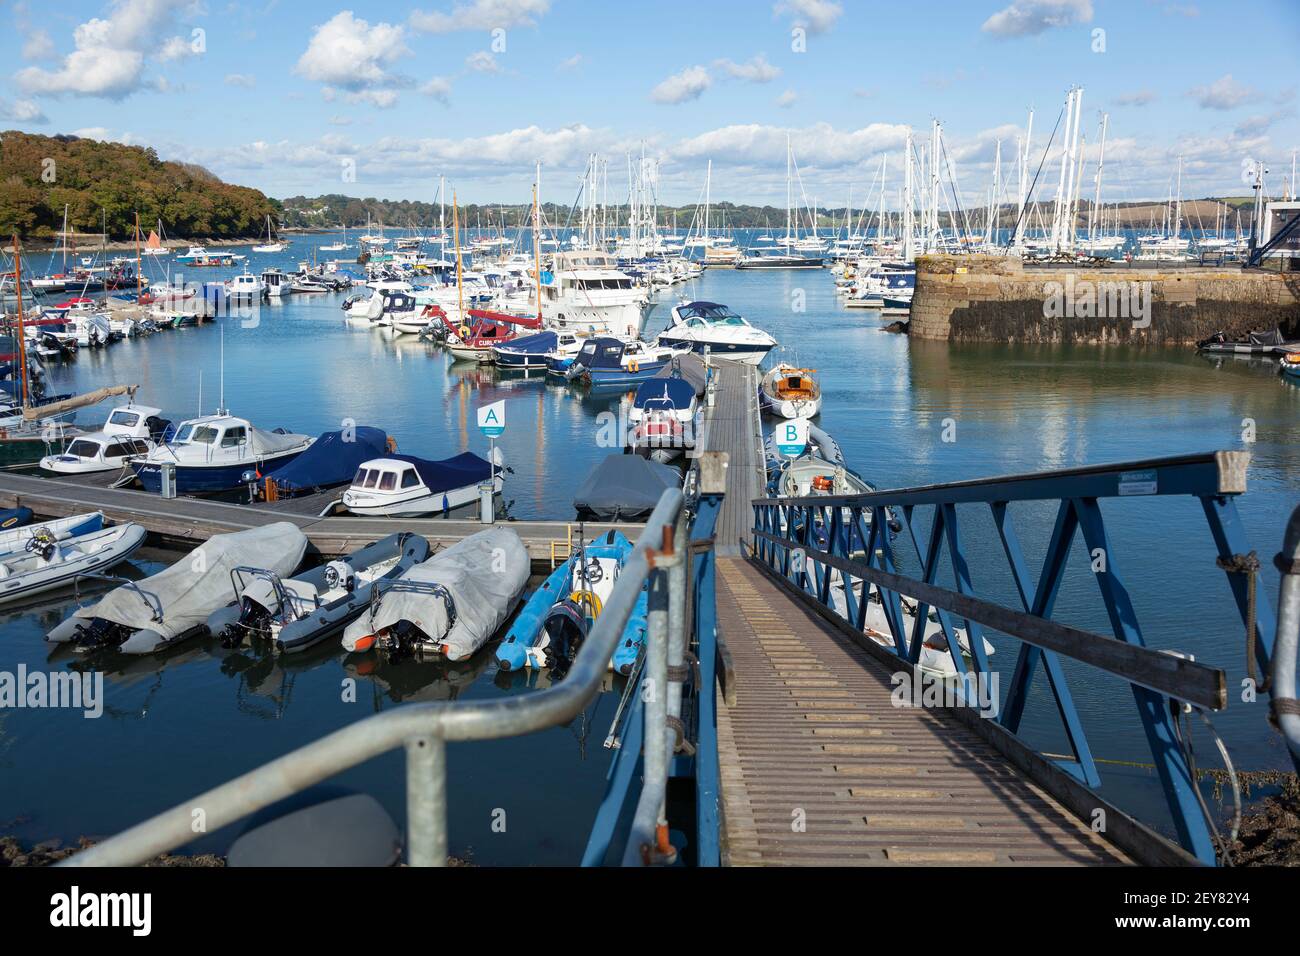 Recreational boats at Mylor Yatch Harbour, accessible by road and from the coastal footpath near Falmouth and Penryn, Cornwall. Stock Photo